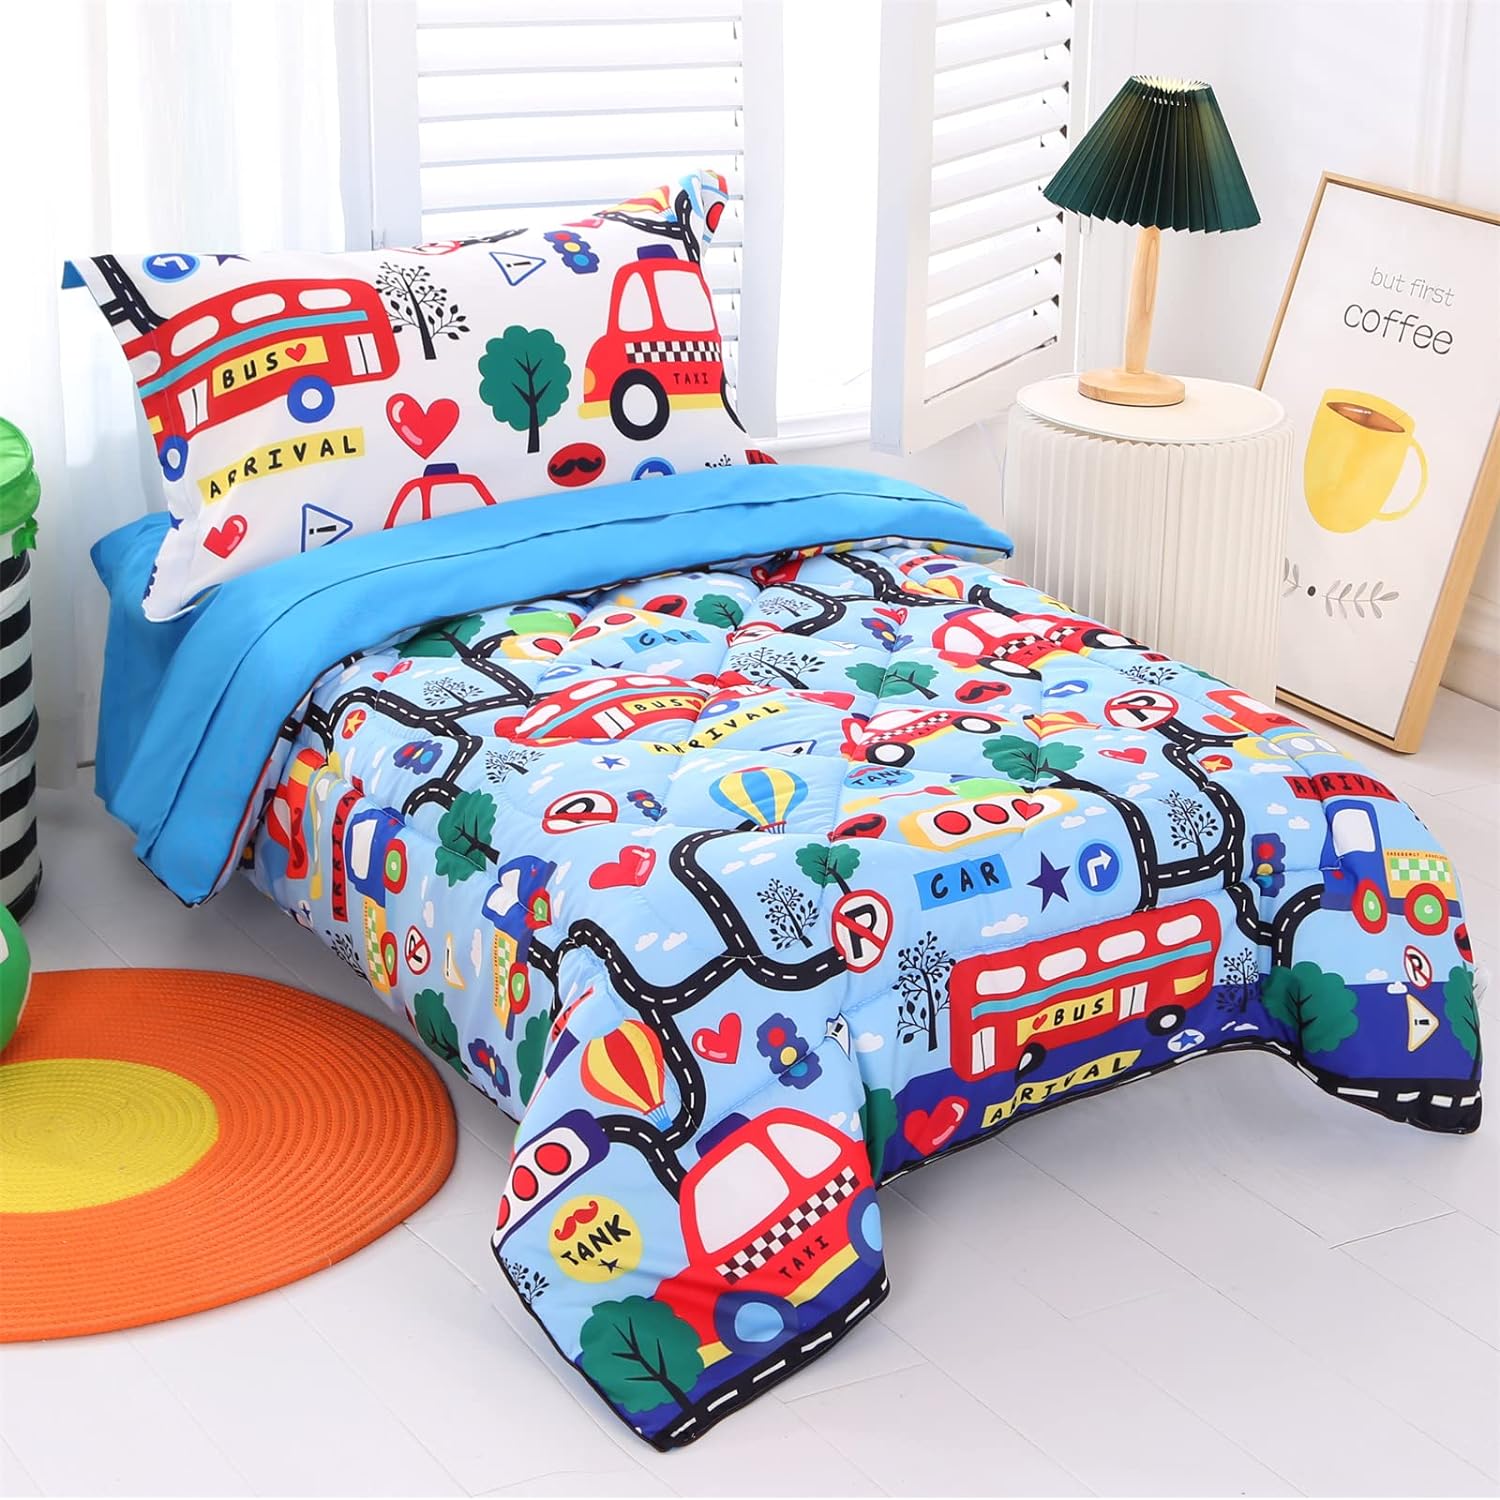 Great Choice Products Car Toddler Bedding Sets For Boys Blue, Premium 4 Piece Car Toddler Bed Sets For Boys And Girls, Super Soft And Comfortable F…